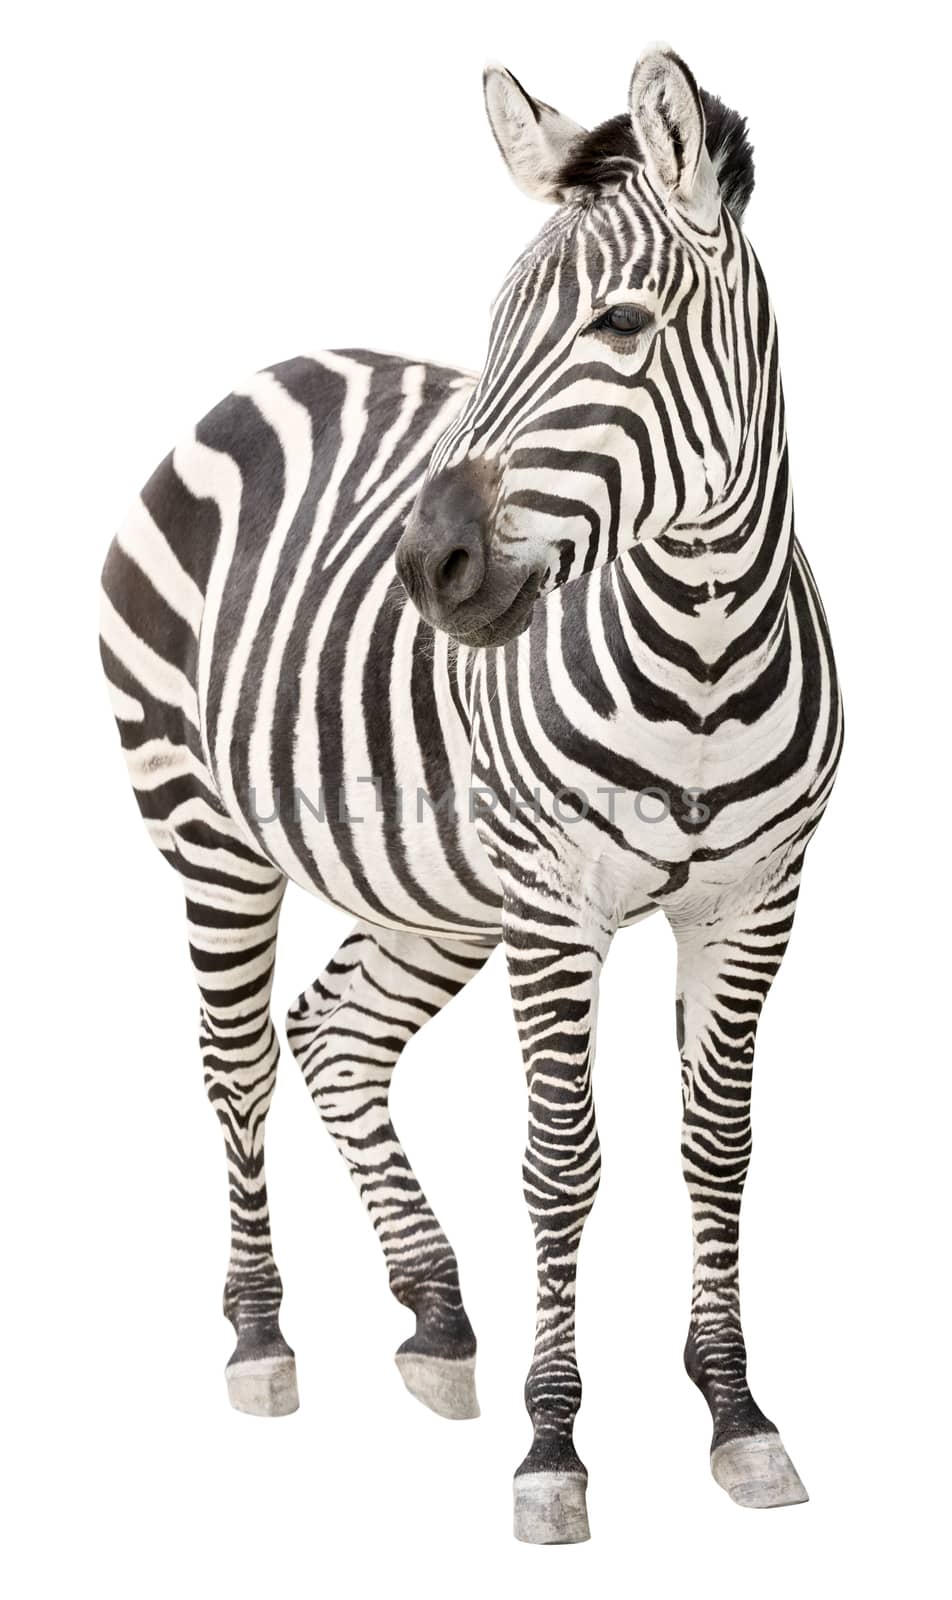 Zebra pregnant two days before foal birth front view looking isolated on white background